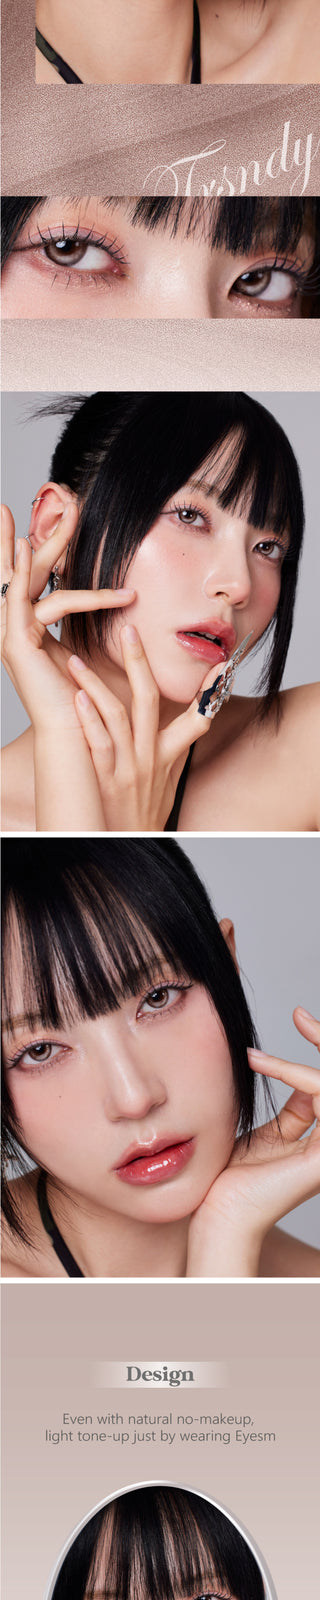 Several views of a Korean model with the Dollring Grace Chocolate Brown color contact lenses. An enlargement of a model's eyes with the prescription colored contacts, demonstrating the subtle yet striking change on dark eyes.